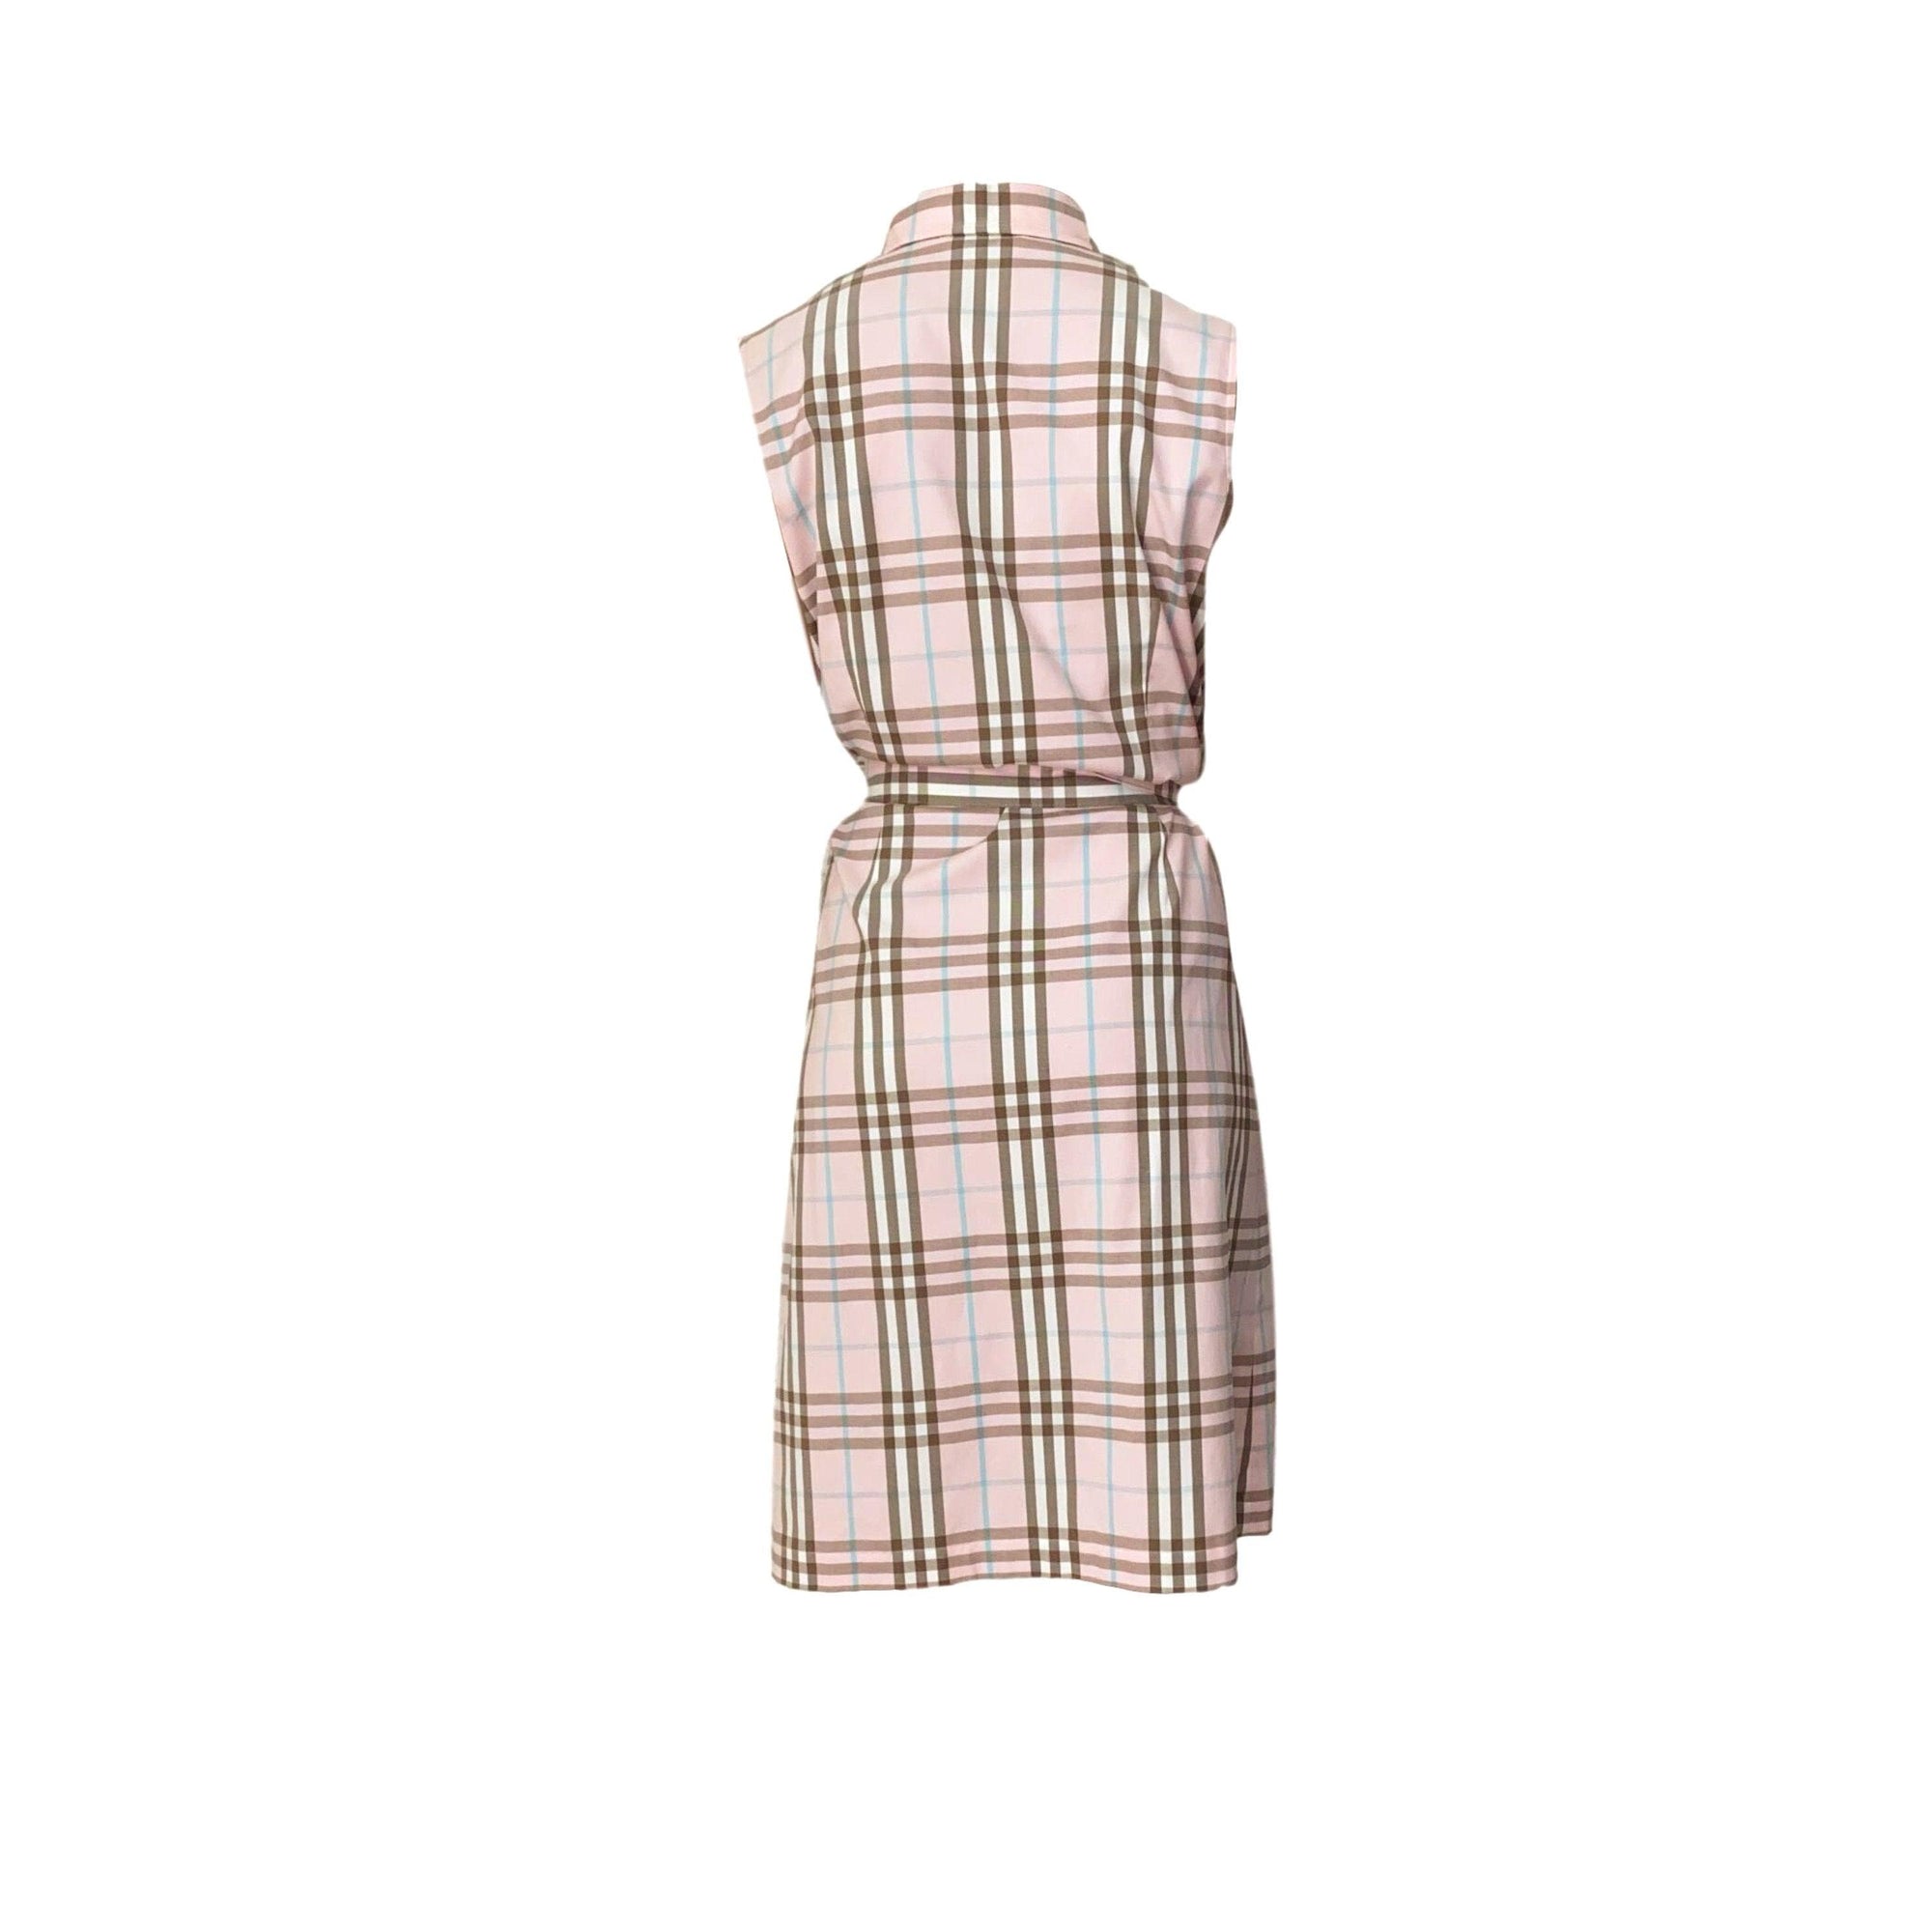 Burberry Classic Pink Plaid Collared Dress - Apparel